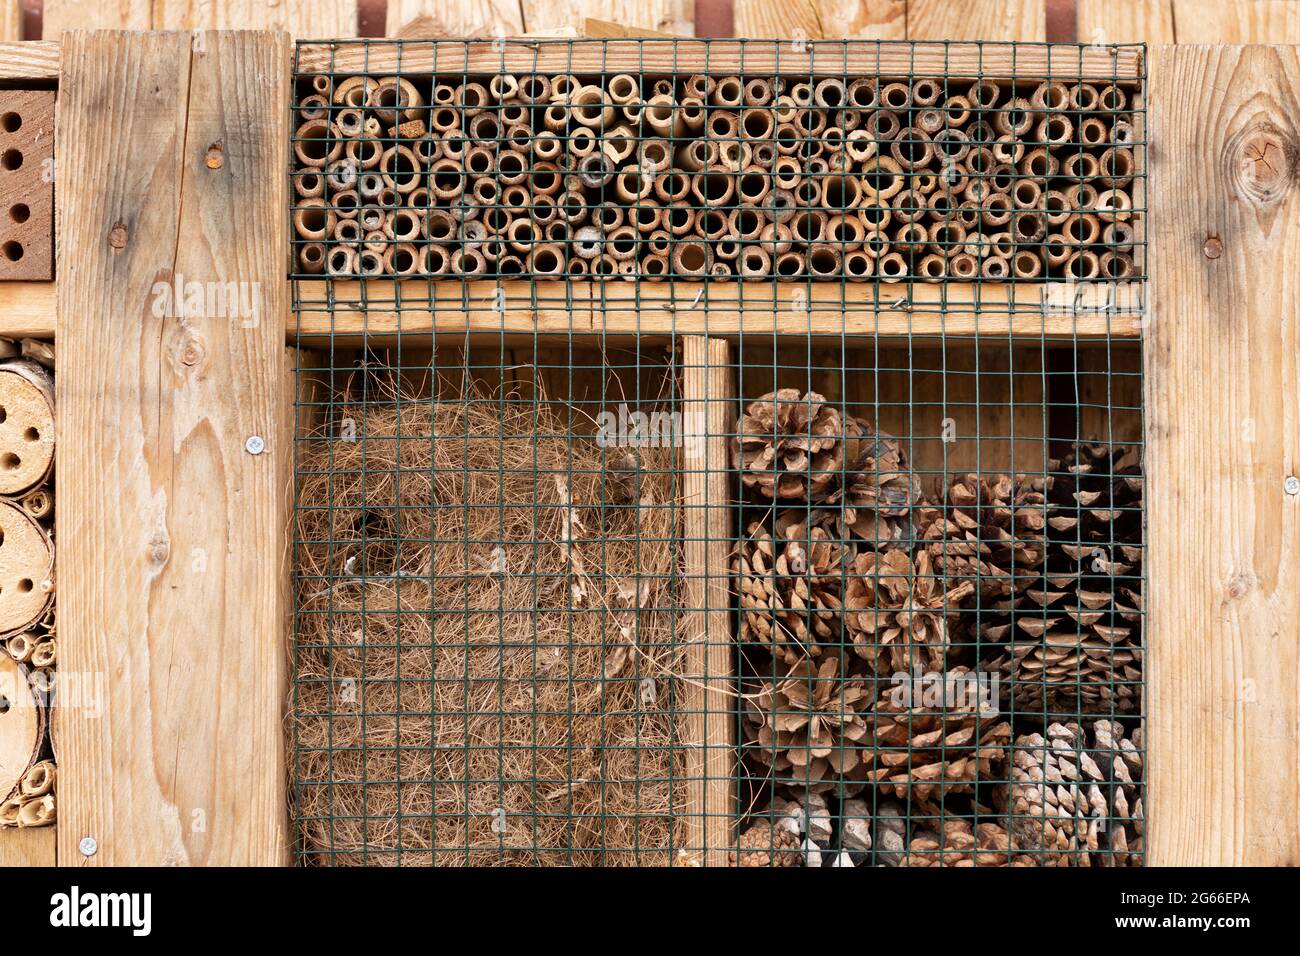 Insect hotel made of natural material like wood, branches, dried grass, bamboo sticks and pine cones for a better biodiversity Stock Photo